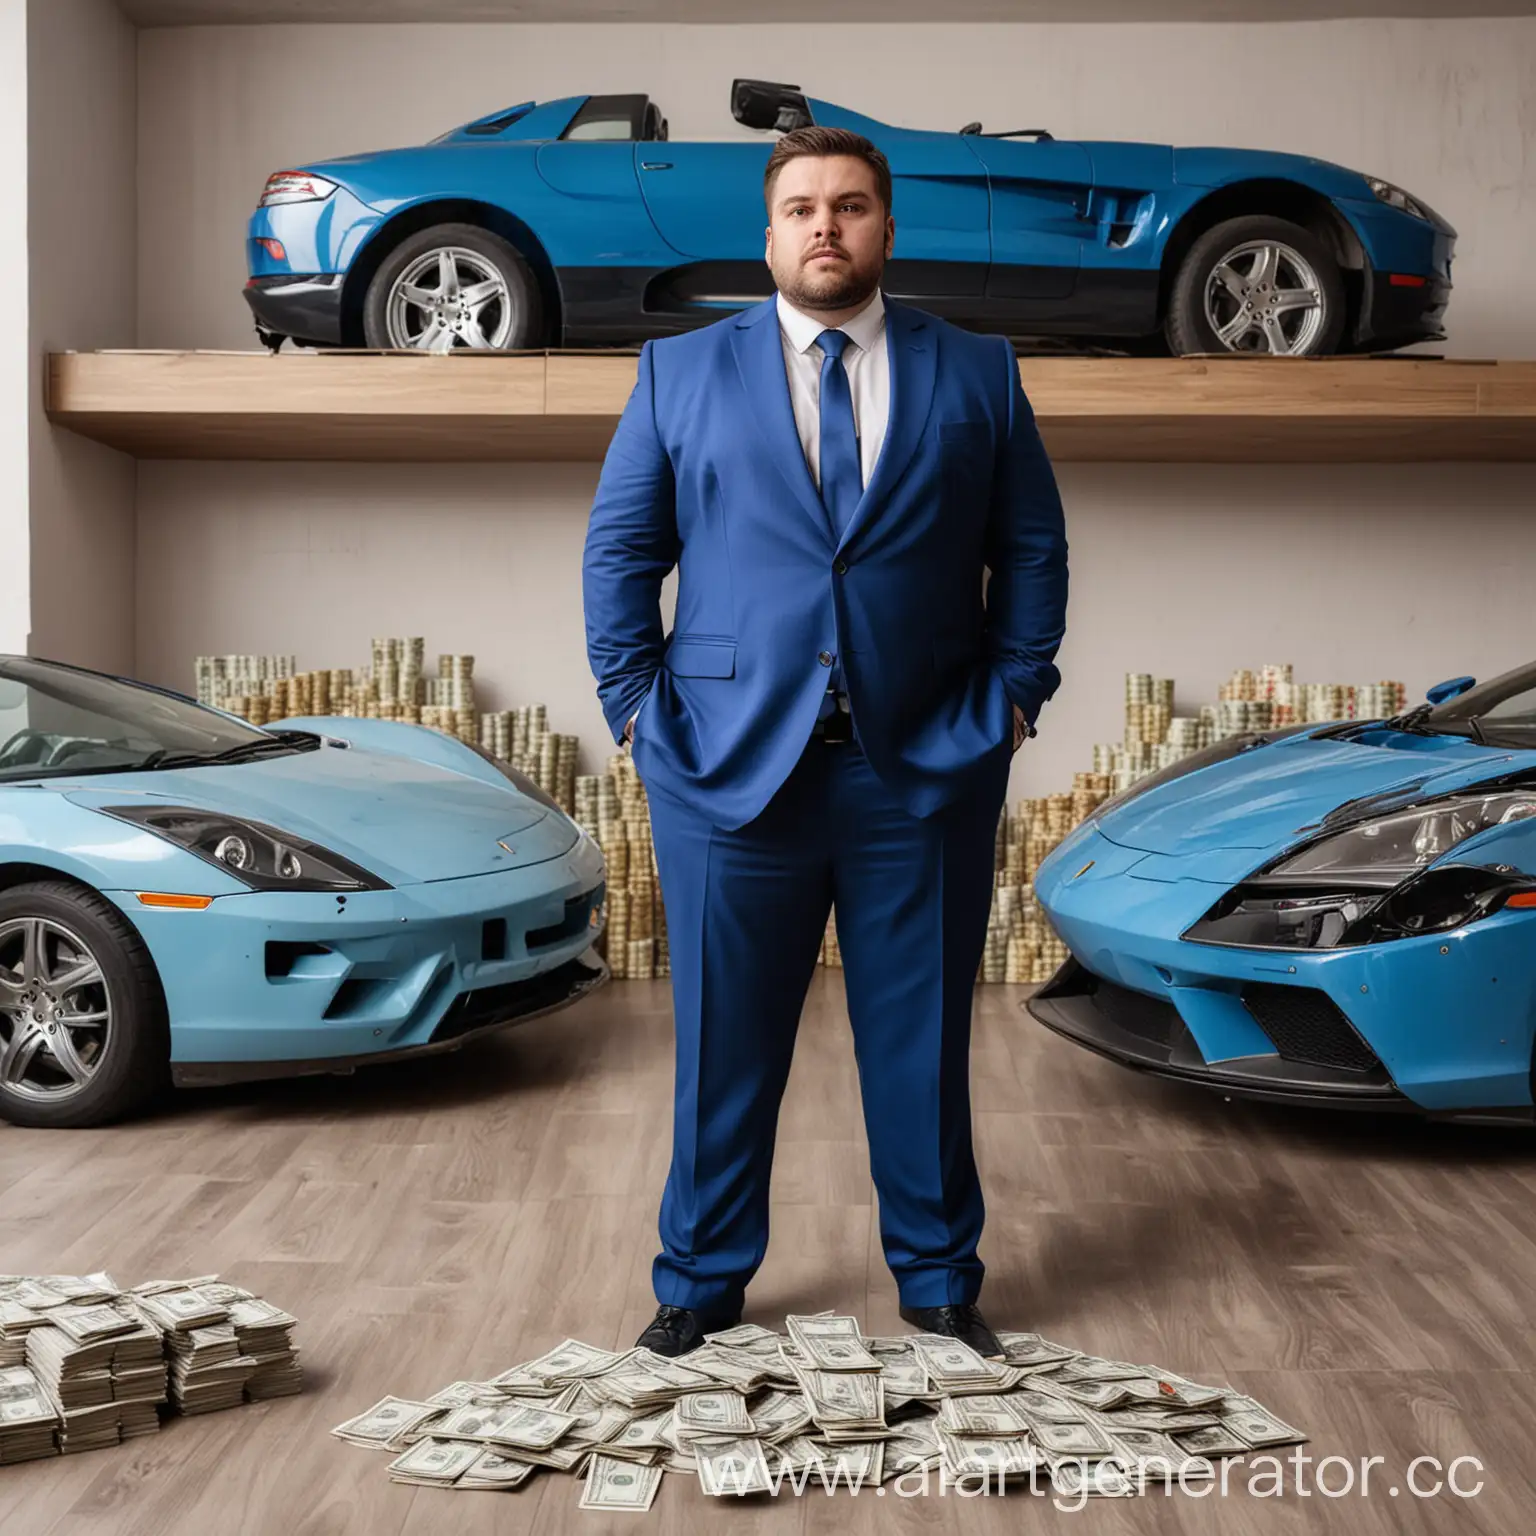 Wealthy-Man-in-Blue-Suit-Surrounded-by-Luxury-Cars-and-Cash